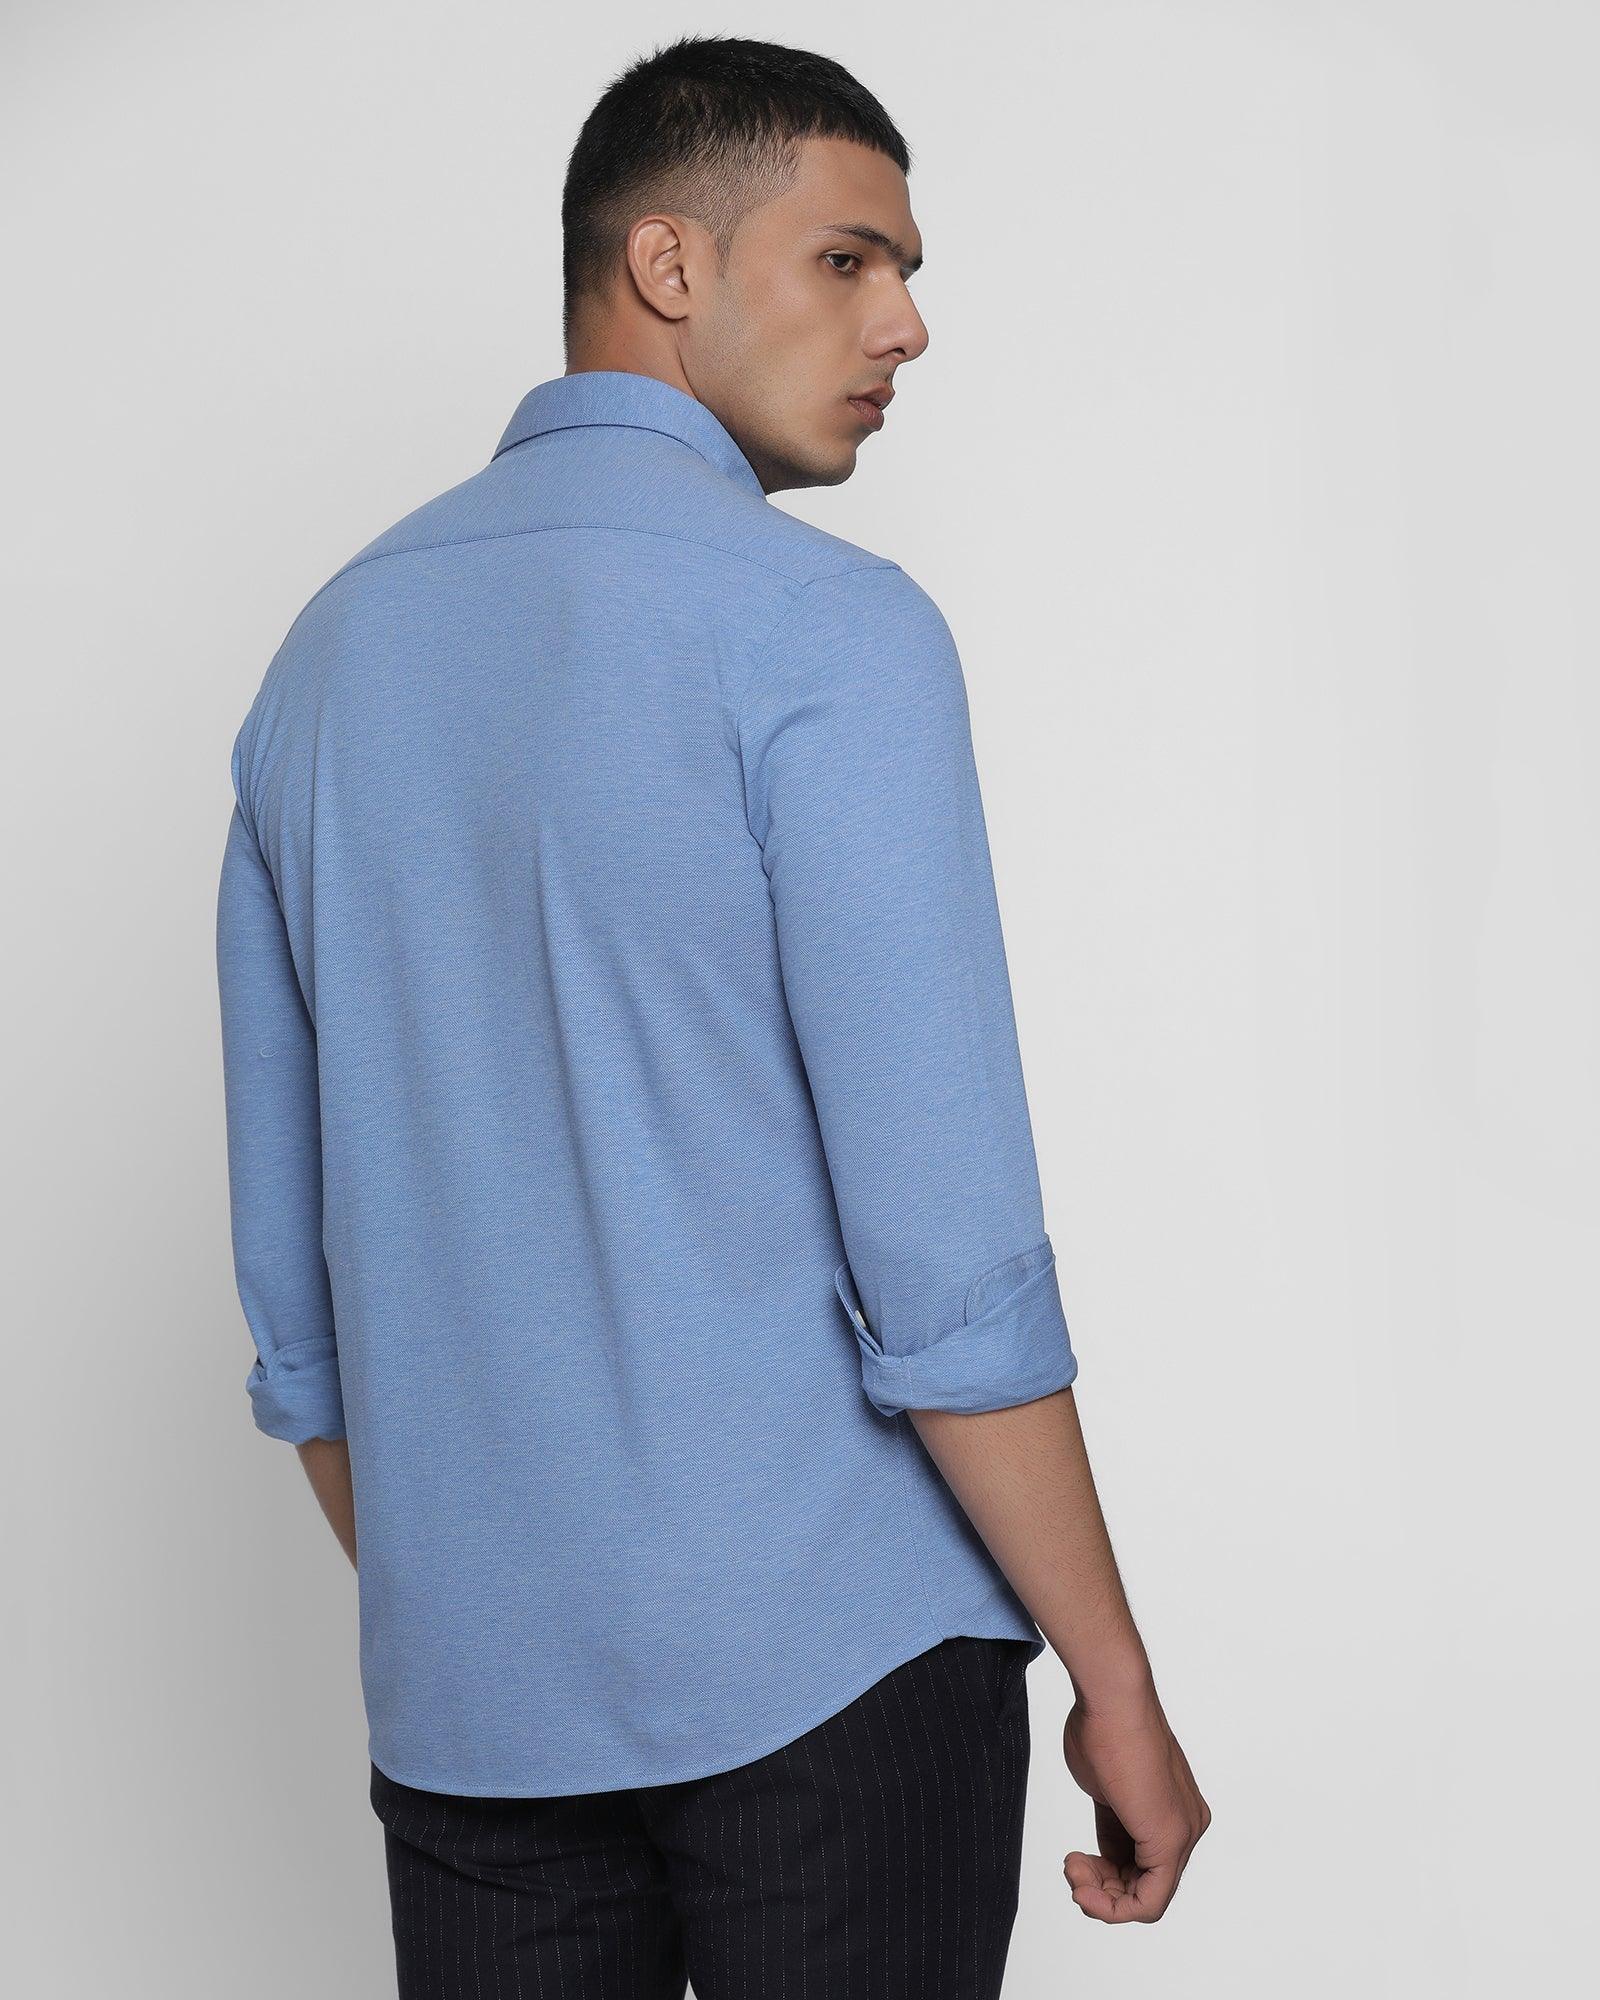 Casual Blue Solid Shirt - Tyler